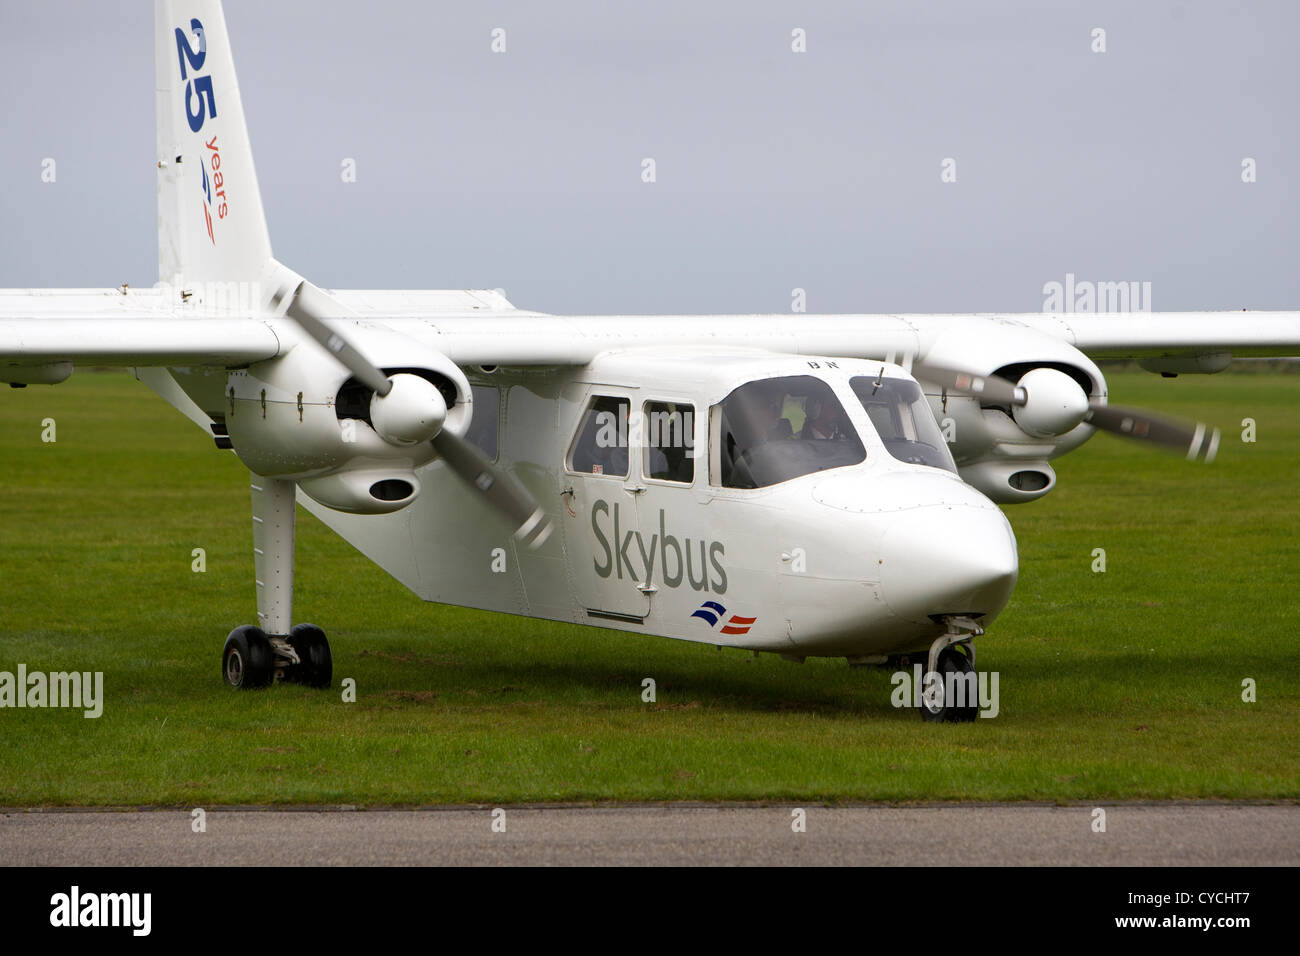 An Islander aircraft operated by Skybus at Lands End Airport Stock Photo